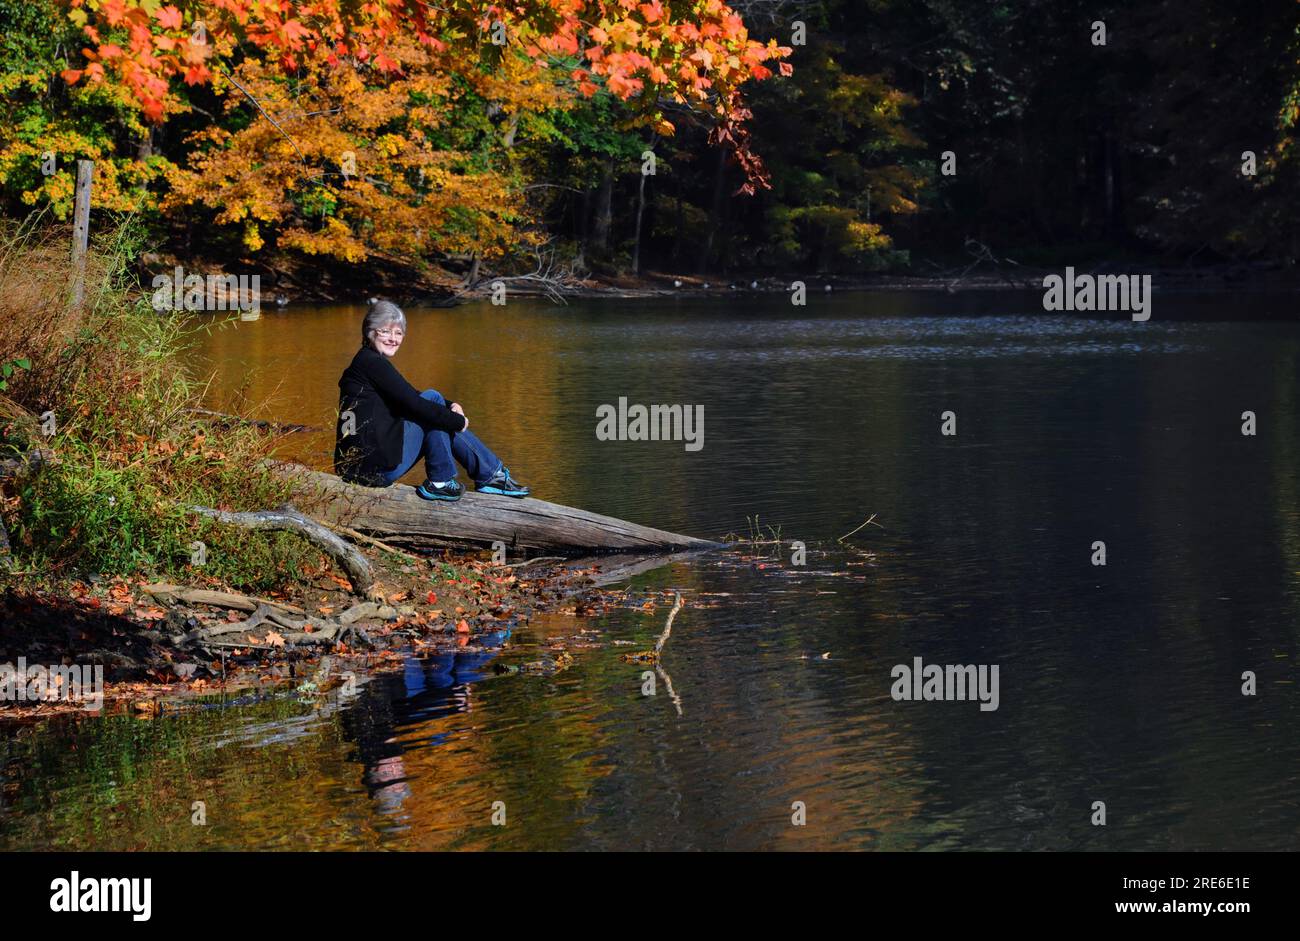 Visitor smiles as she sits quietly on a log besides PoplarTree Lake in Meeman-Shelby State Park near Memphis, Tennessee.  Autumn colors fill image. Stock Photo